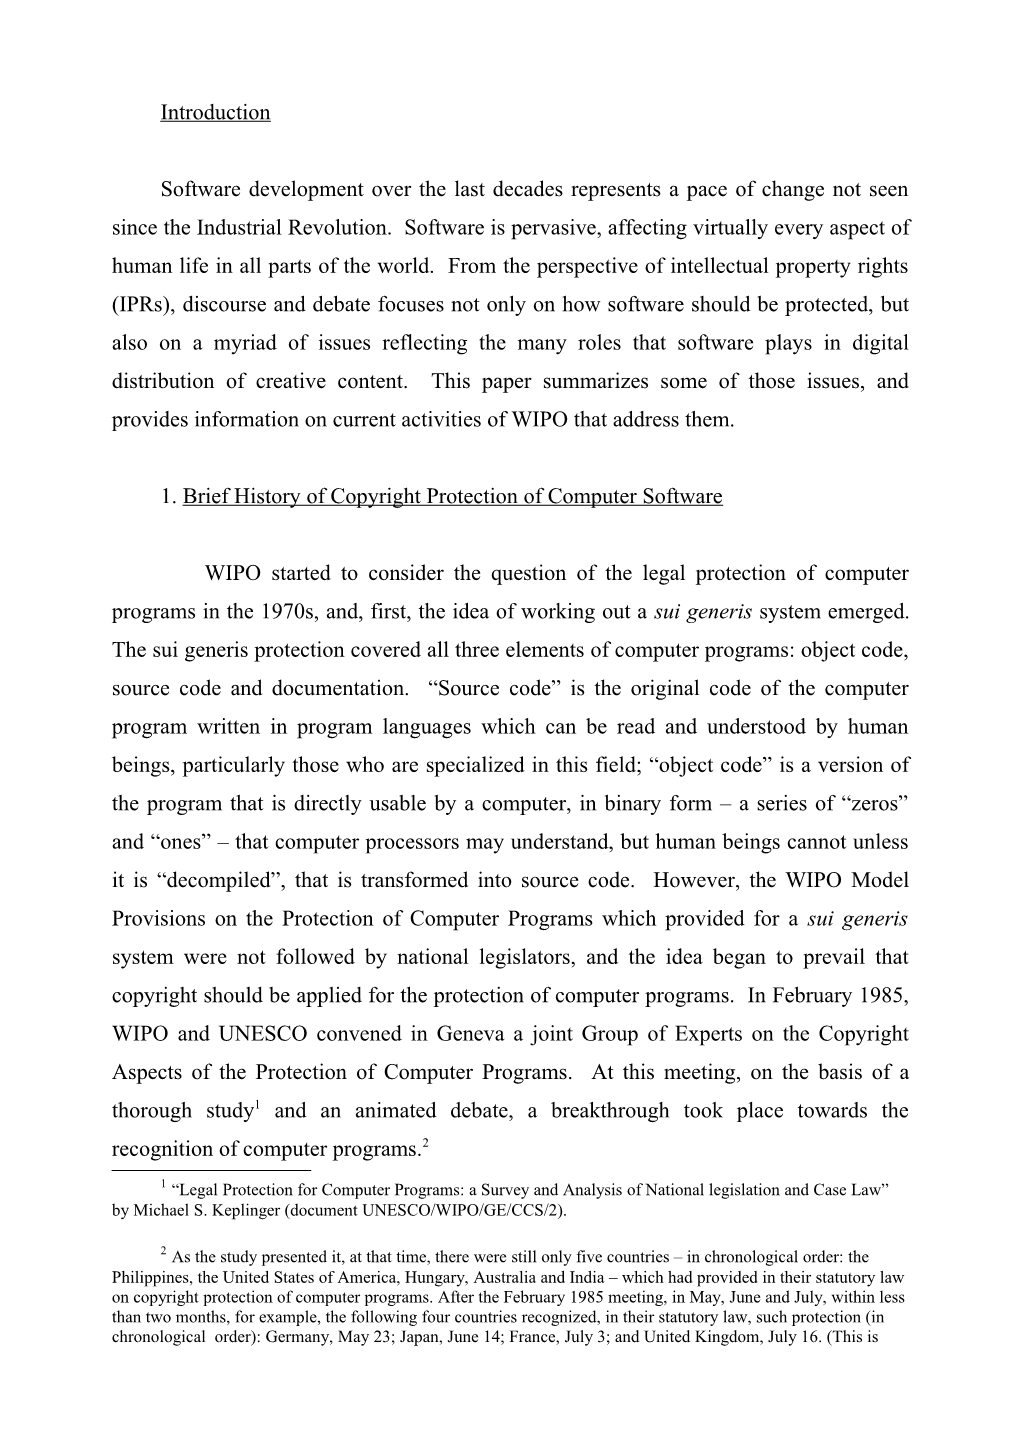 WIPO/IP/CM/07/WWW 82573 : Topic 1: International IP Protection of Software: History, Purpose